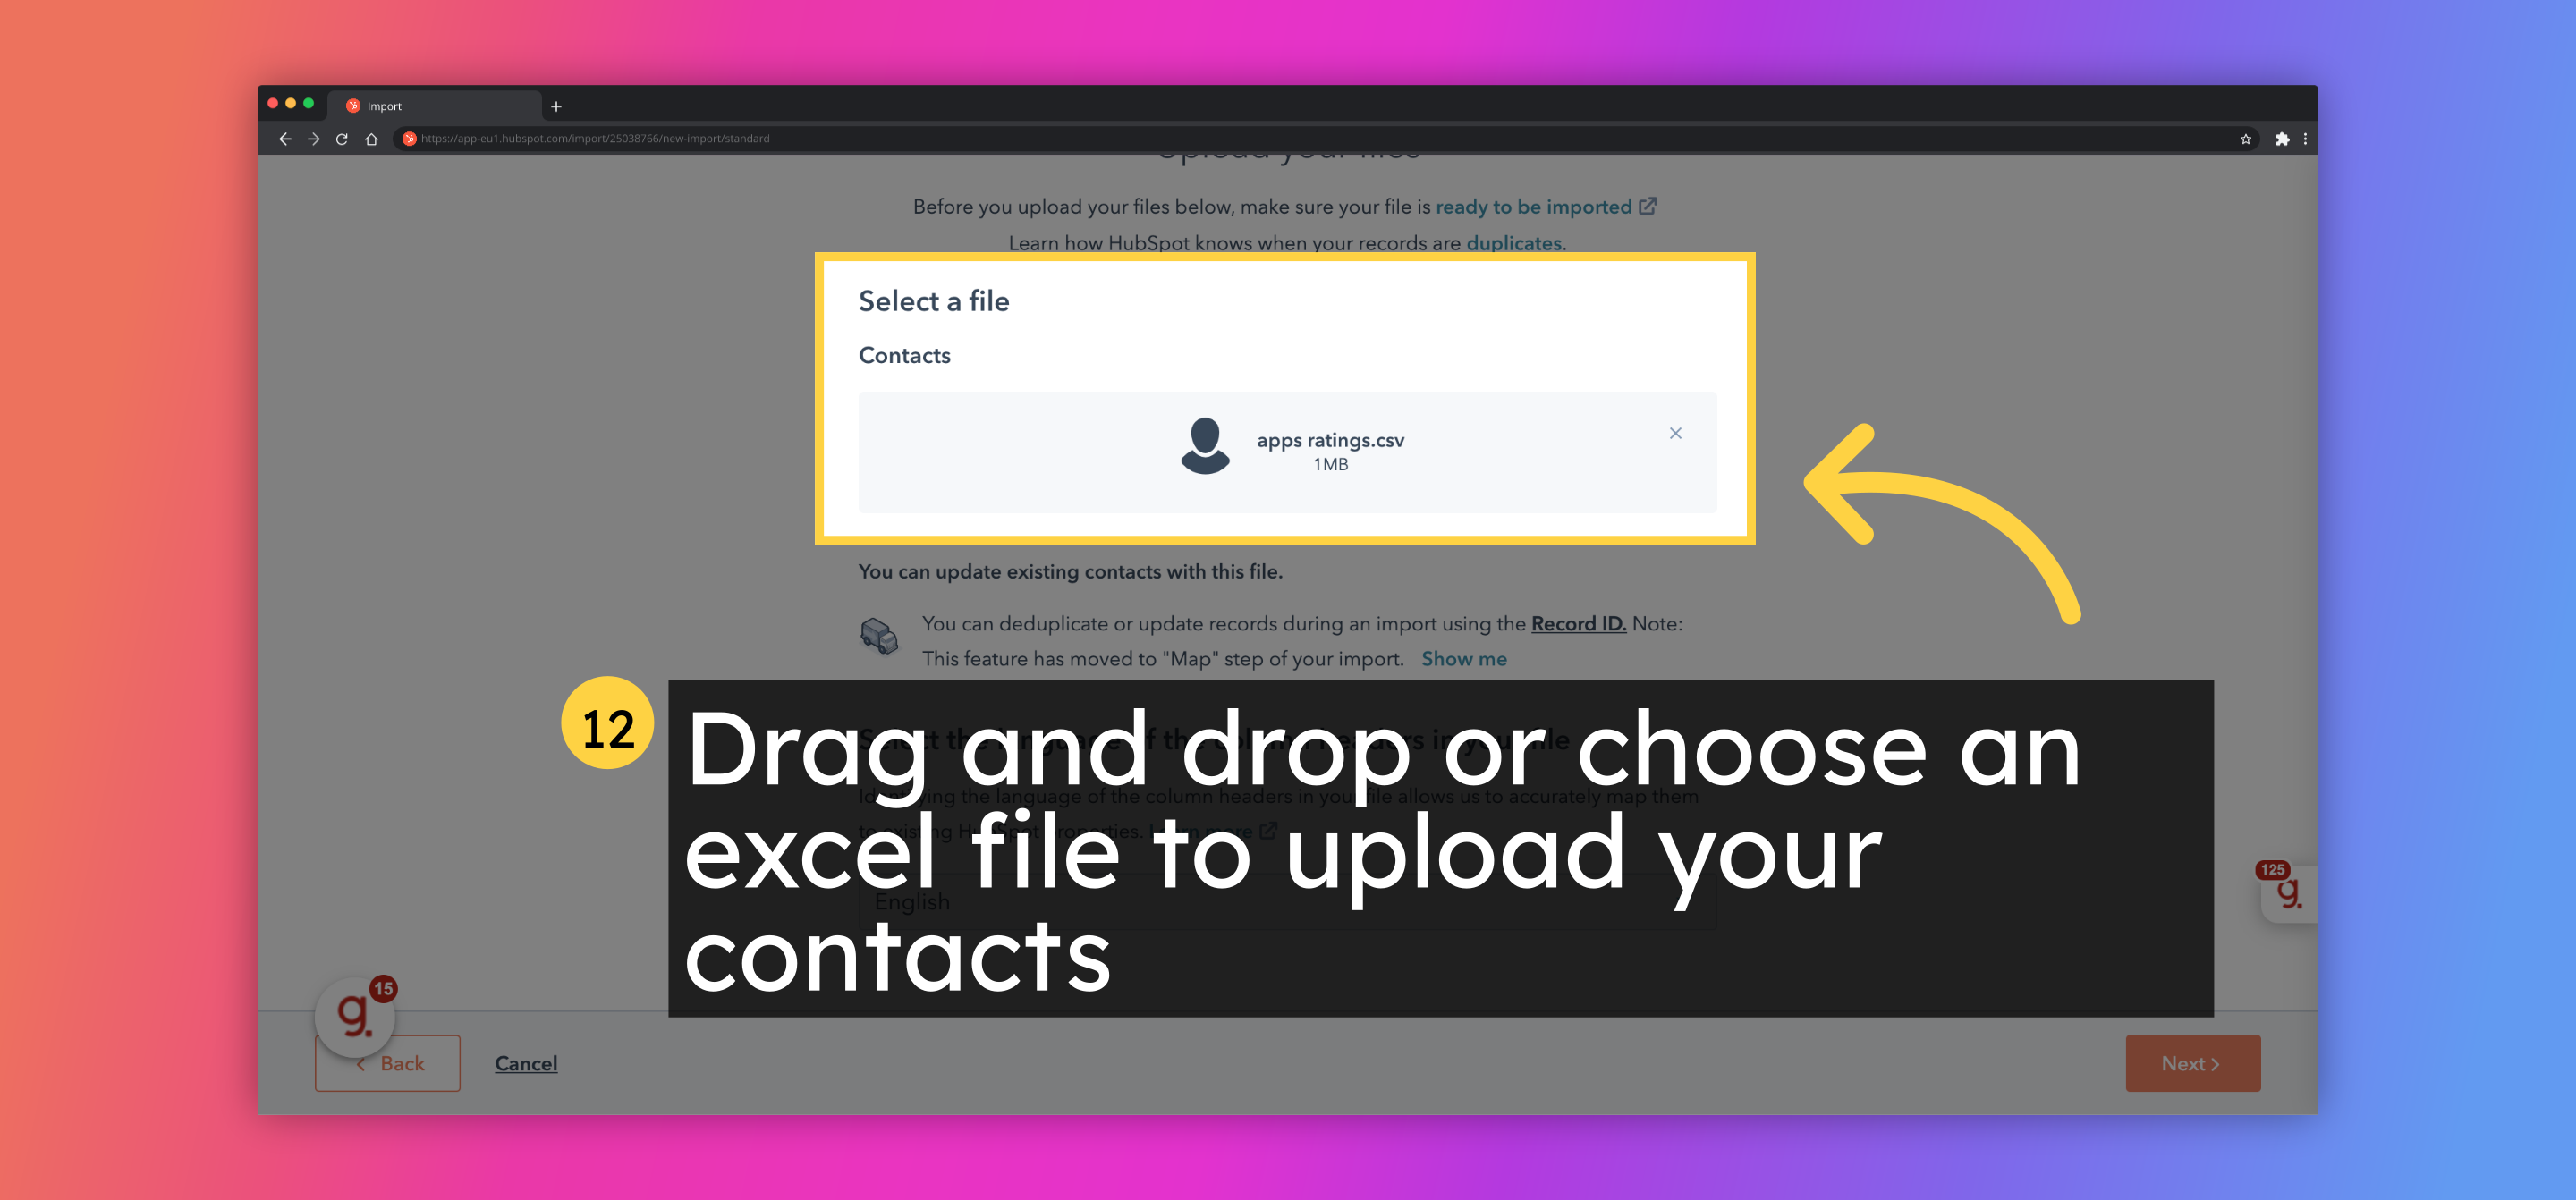 Drag and drop or choose an excel file to upload your contacts